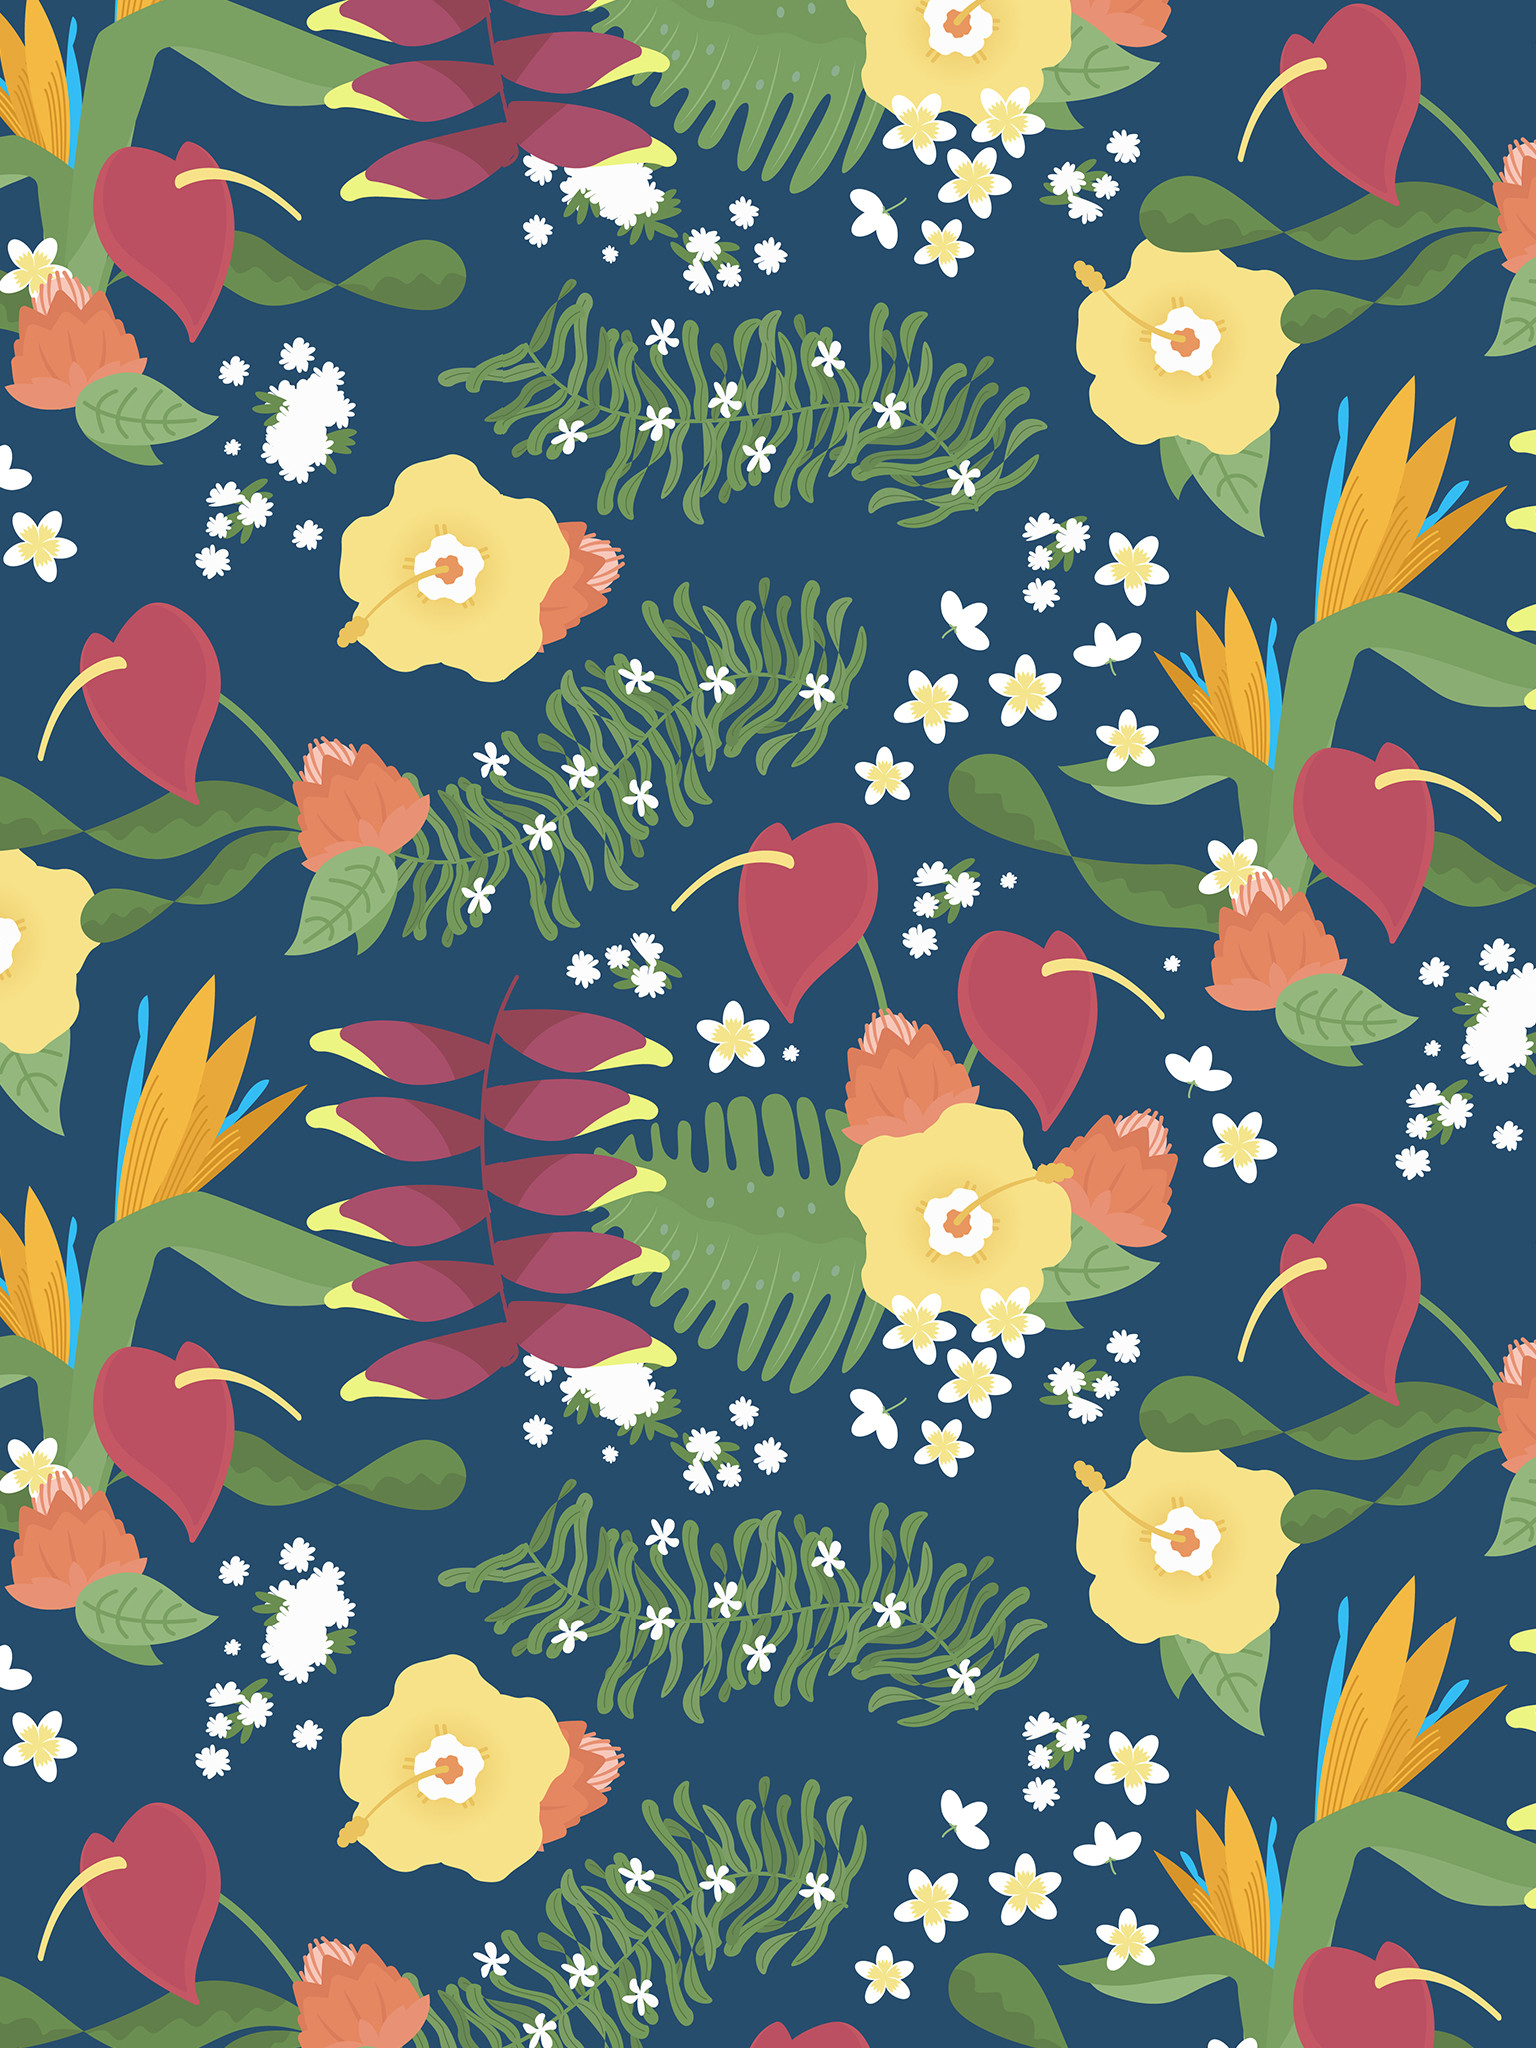 1536x2048 ... received on my newest patterns, I've decided to make select prints  available for your phone an tablet backgrounds. This first release feature  a floral ...